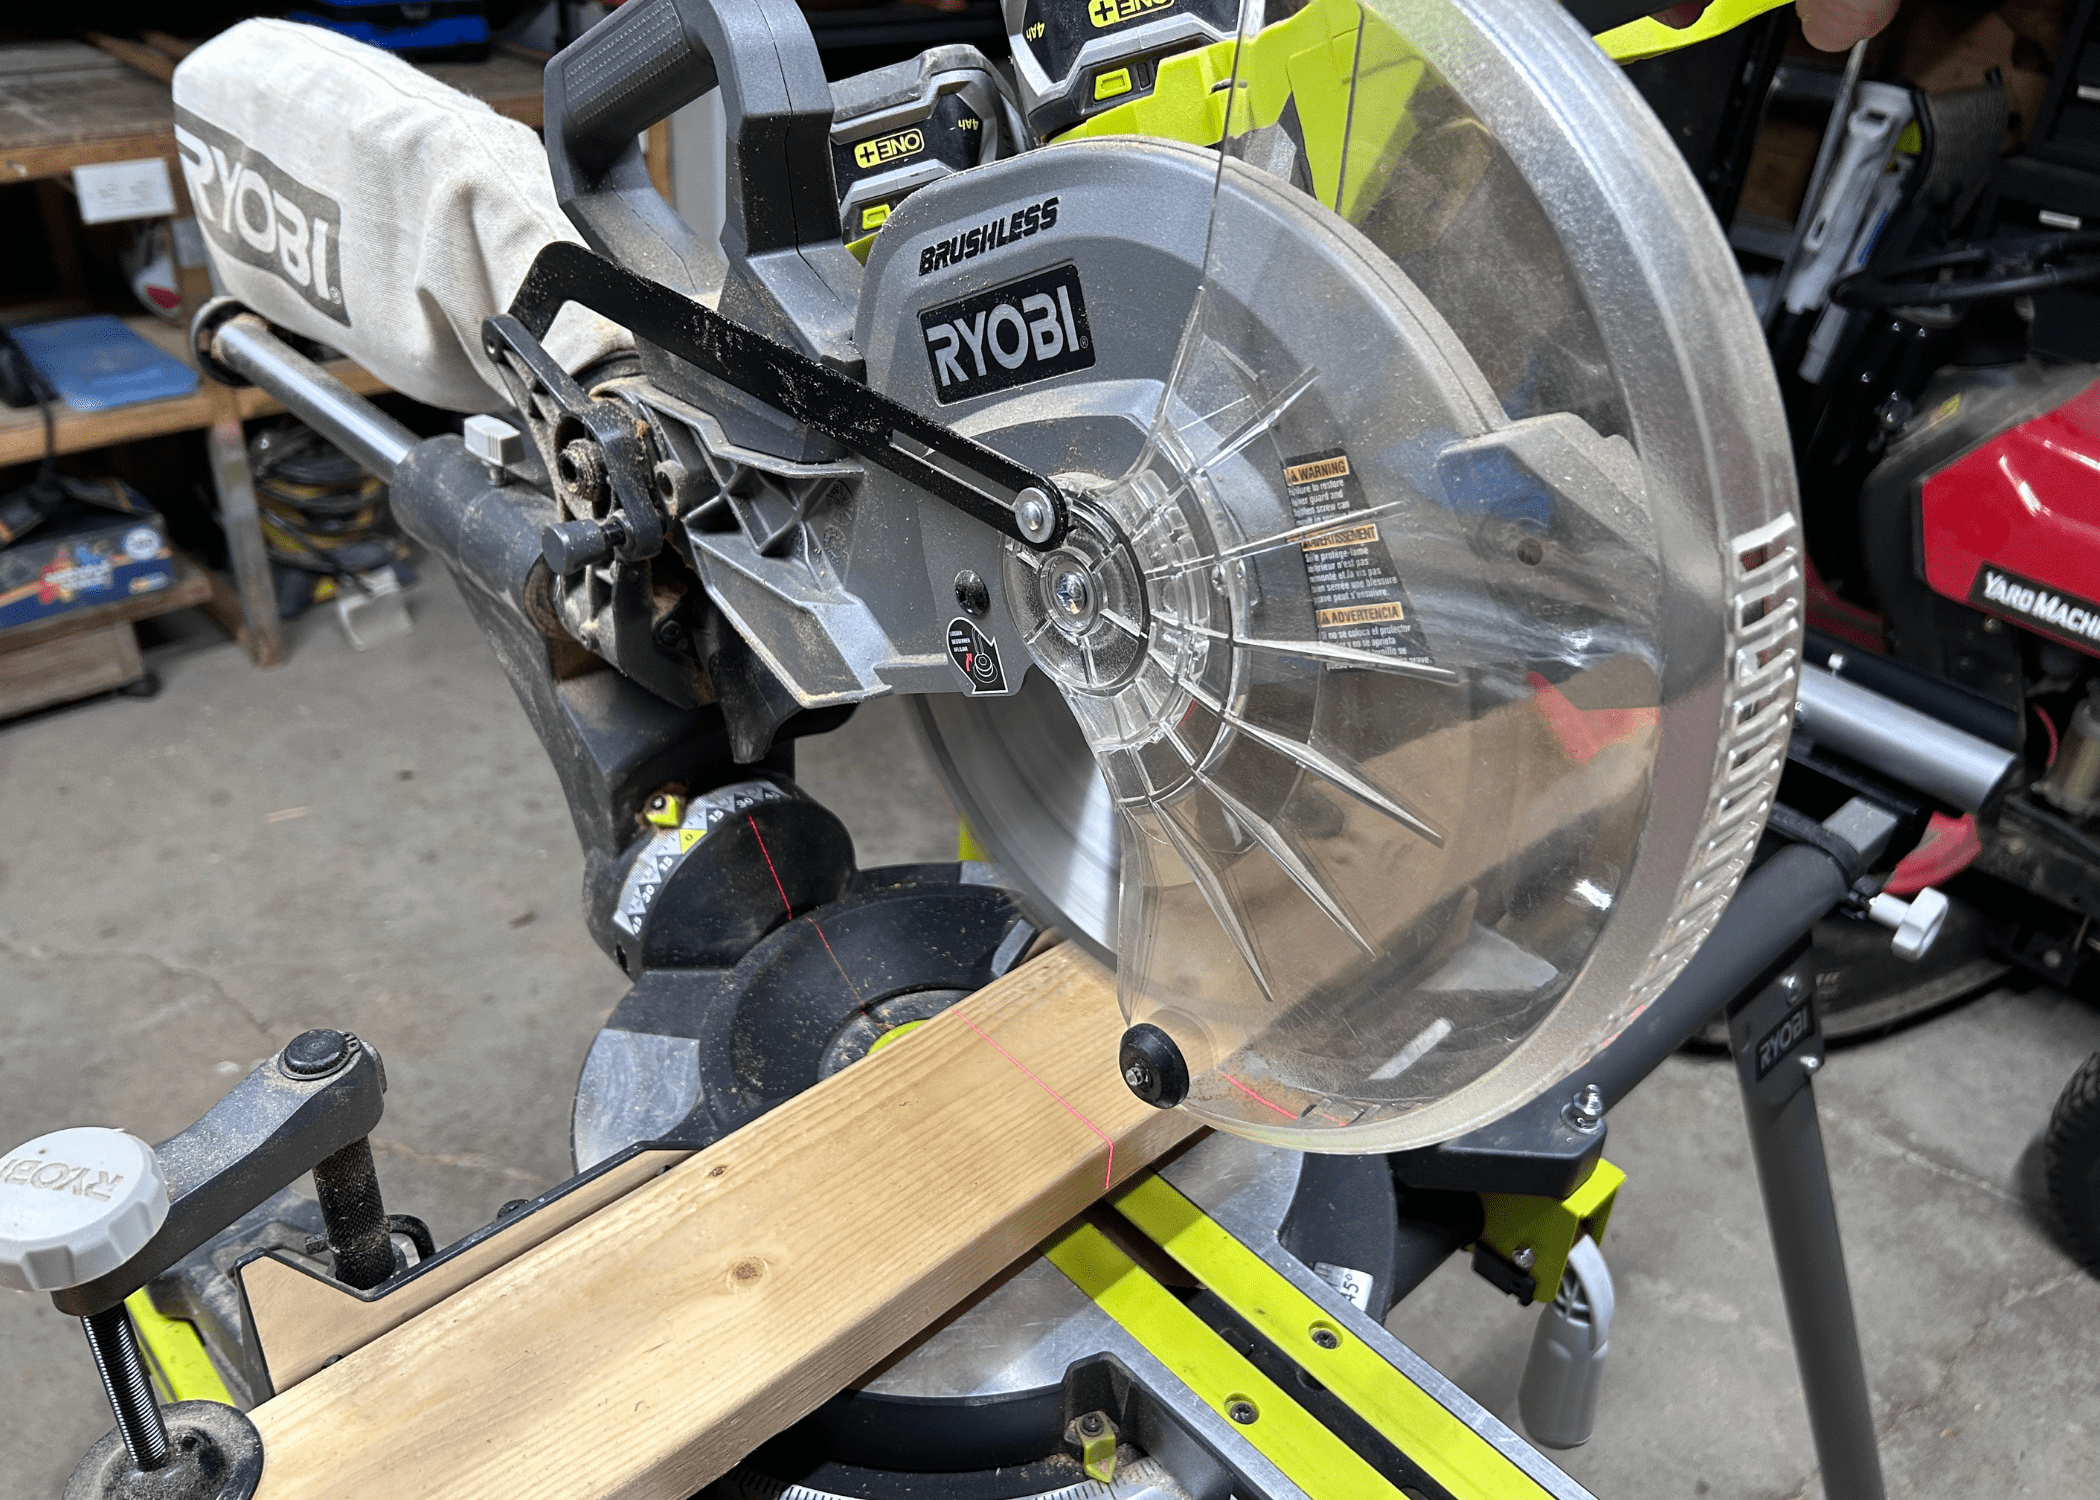 miter saw about to cut a piece of wood